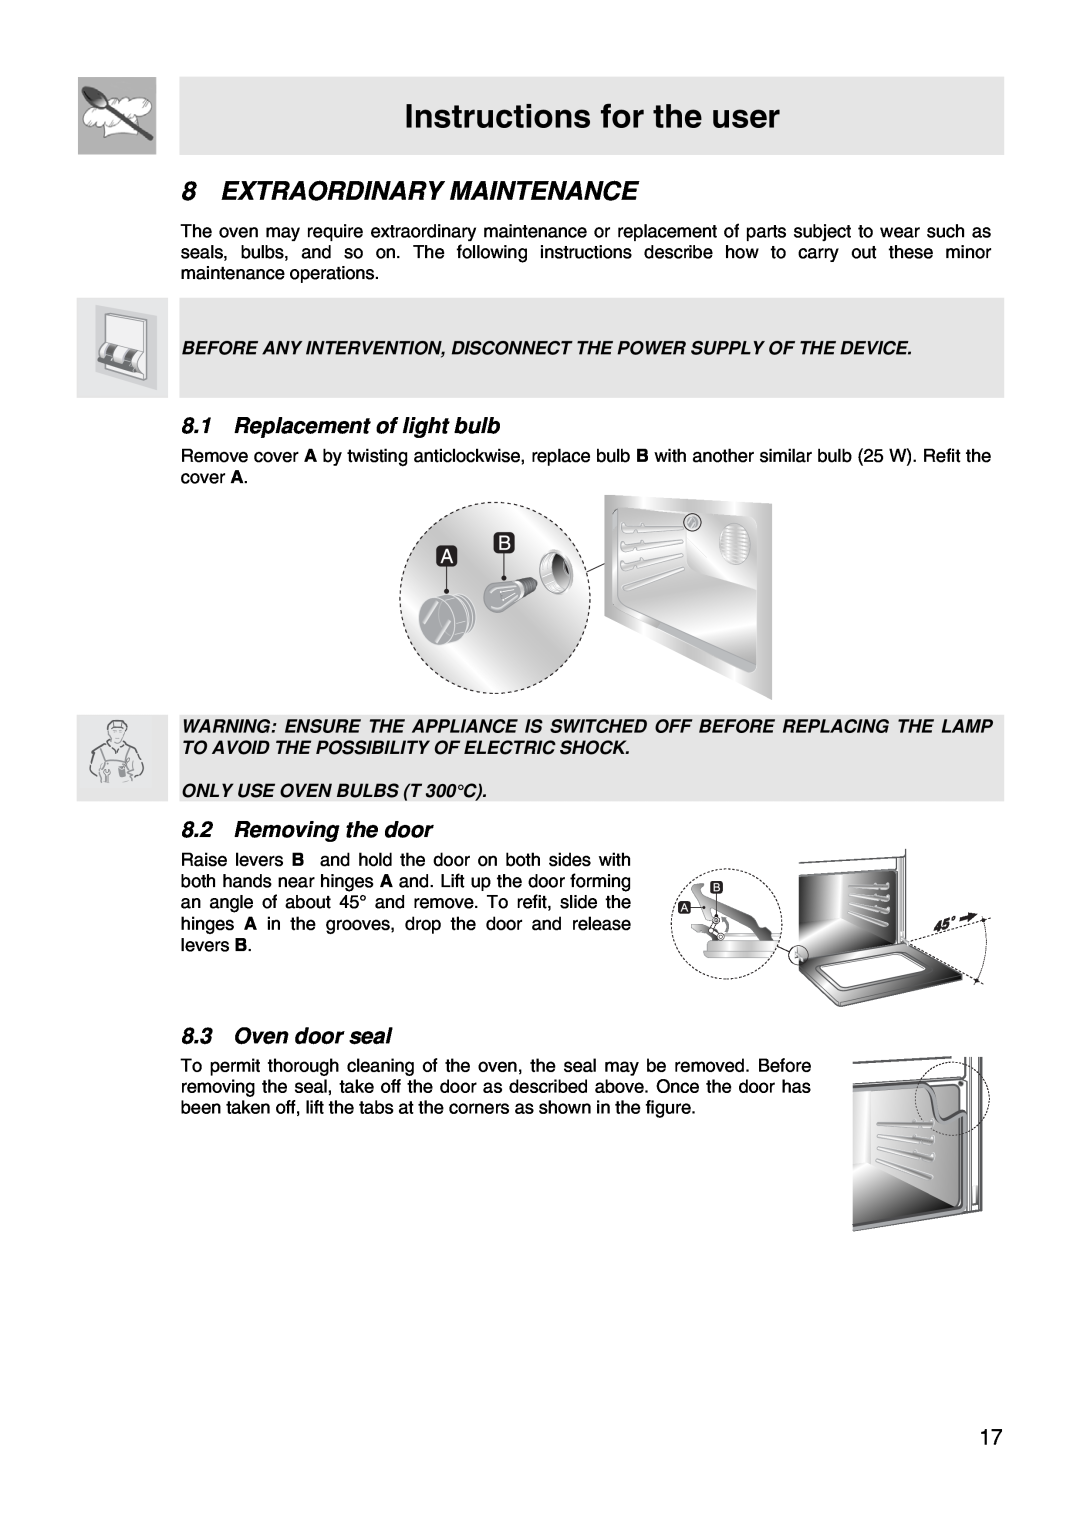 Smeg FS67MFX Extraordinary Maintenance, Instructions for the user, 8.1Replacement of light bulb, 8.2Removing the door 